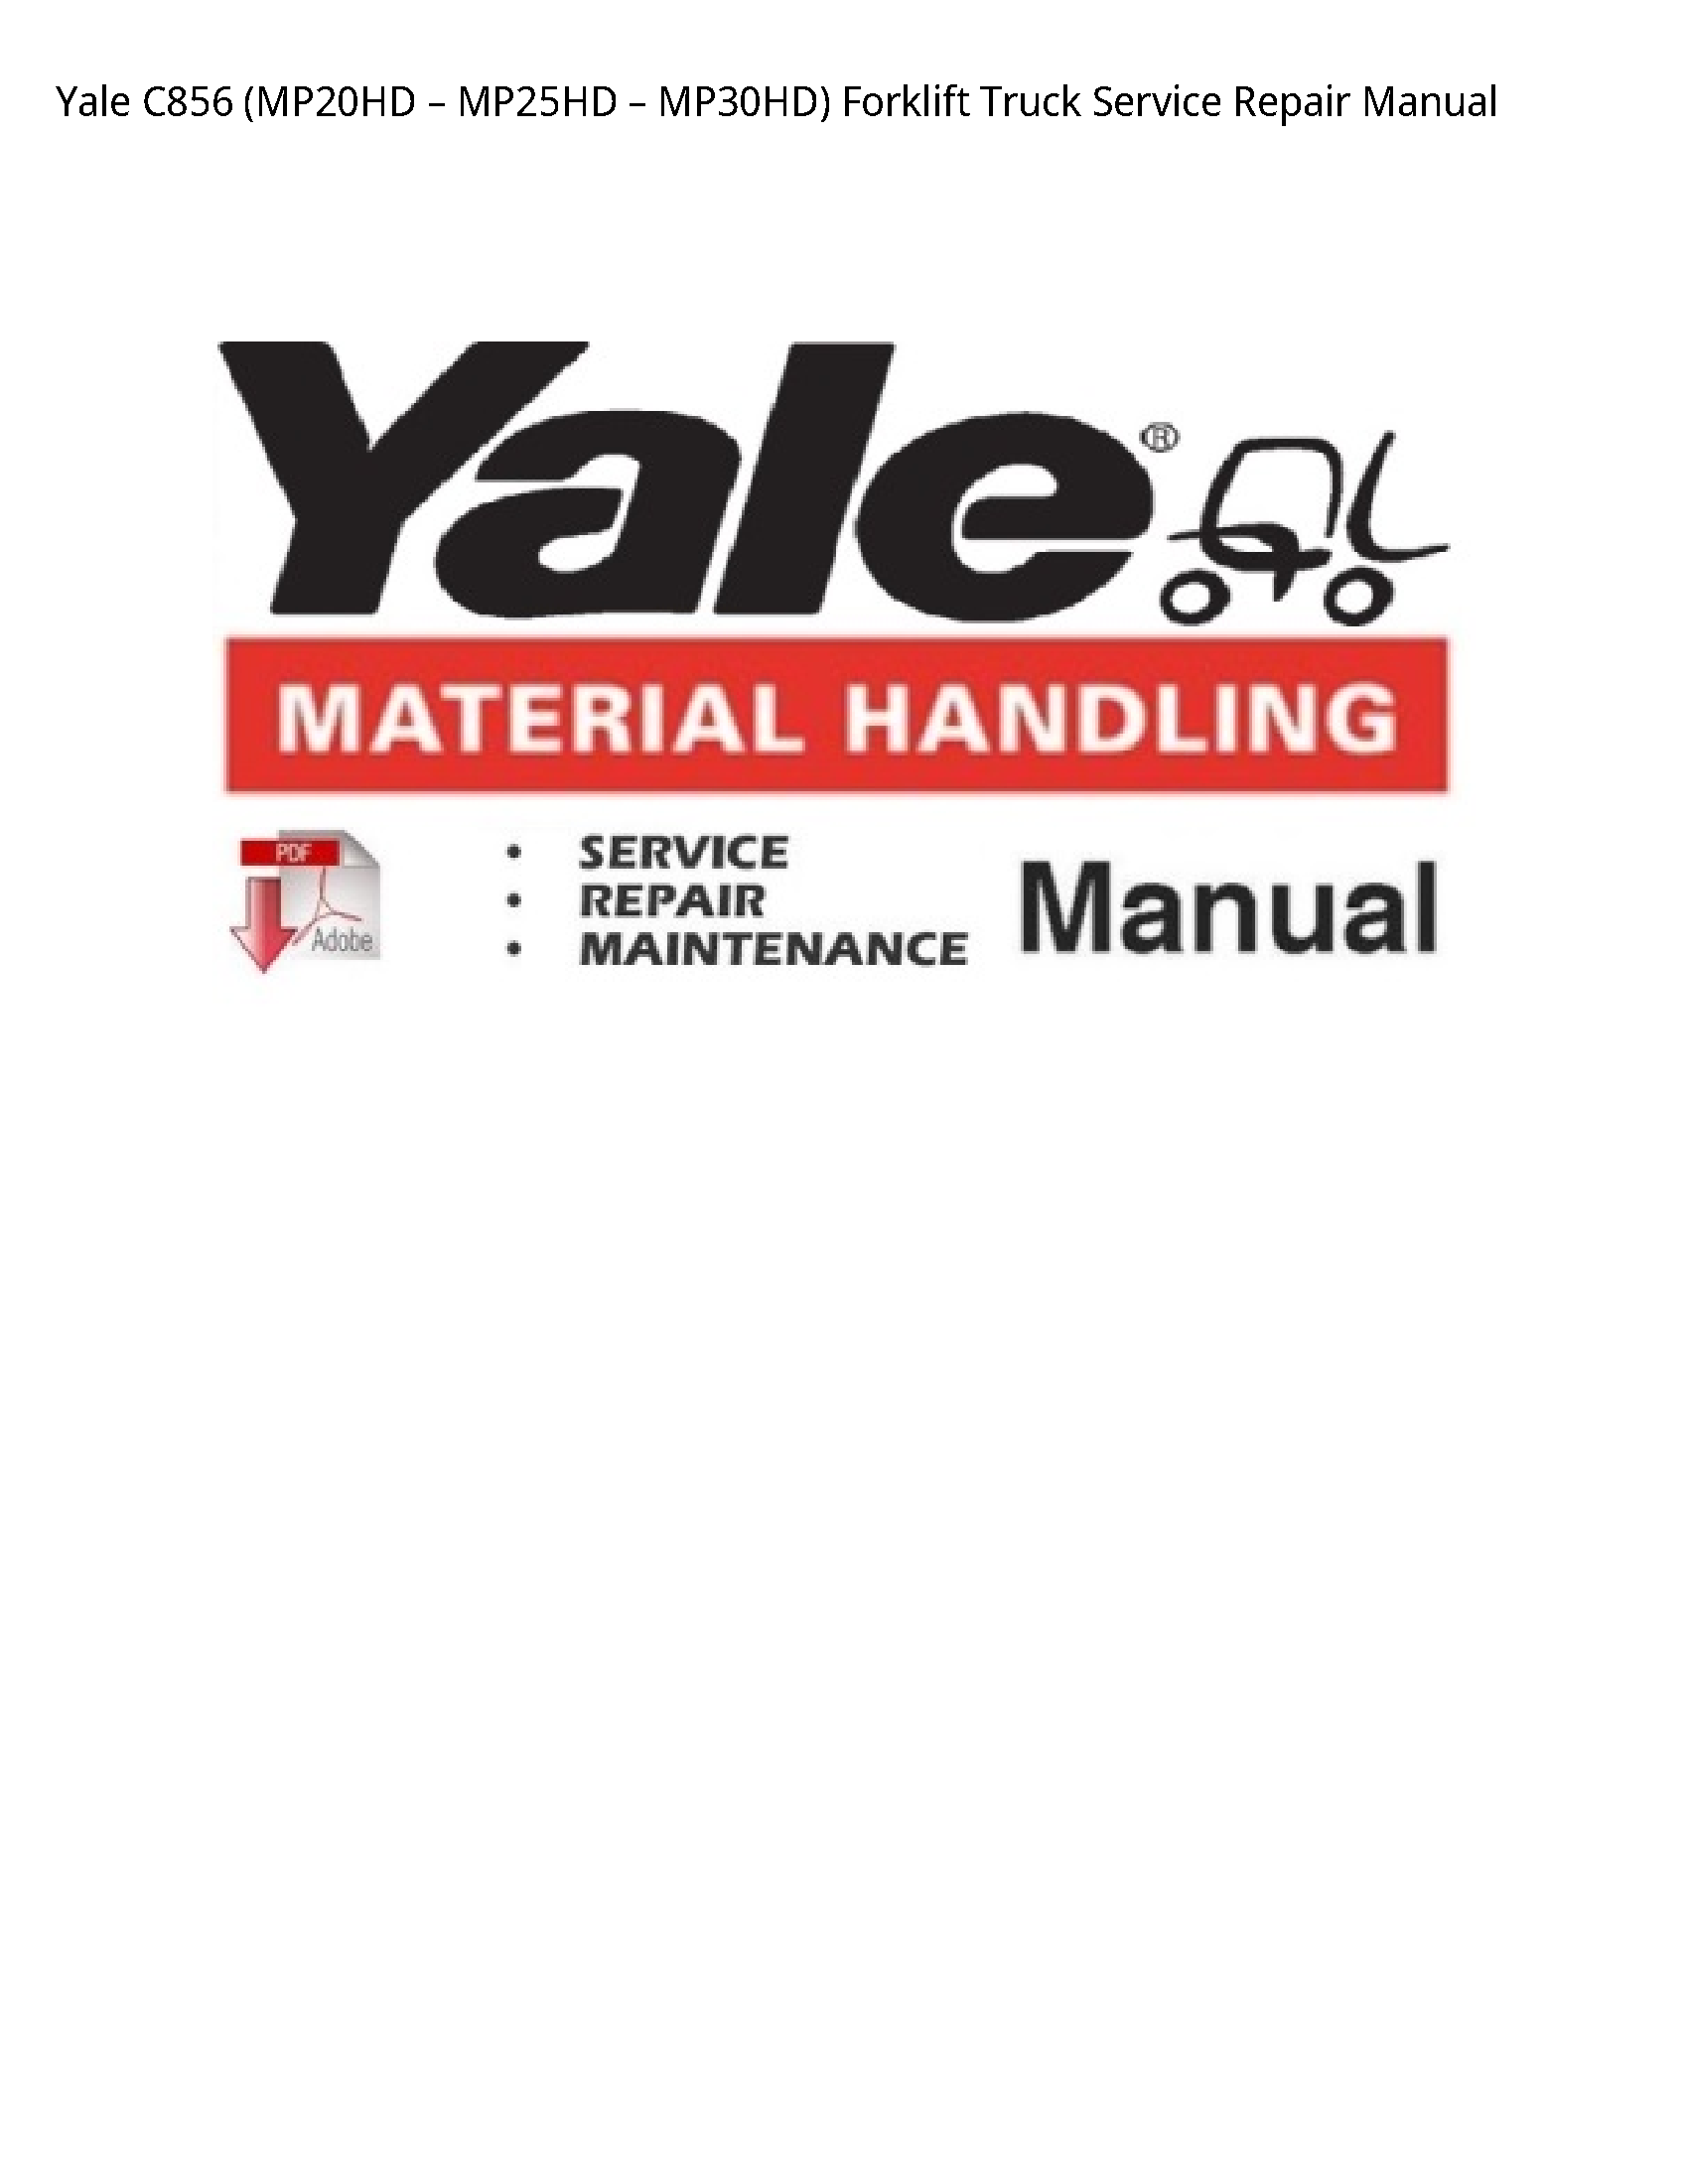 Yale C856 Forklift Truck manual